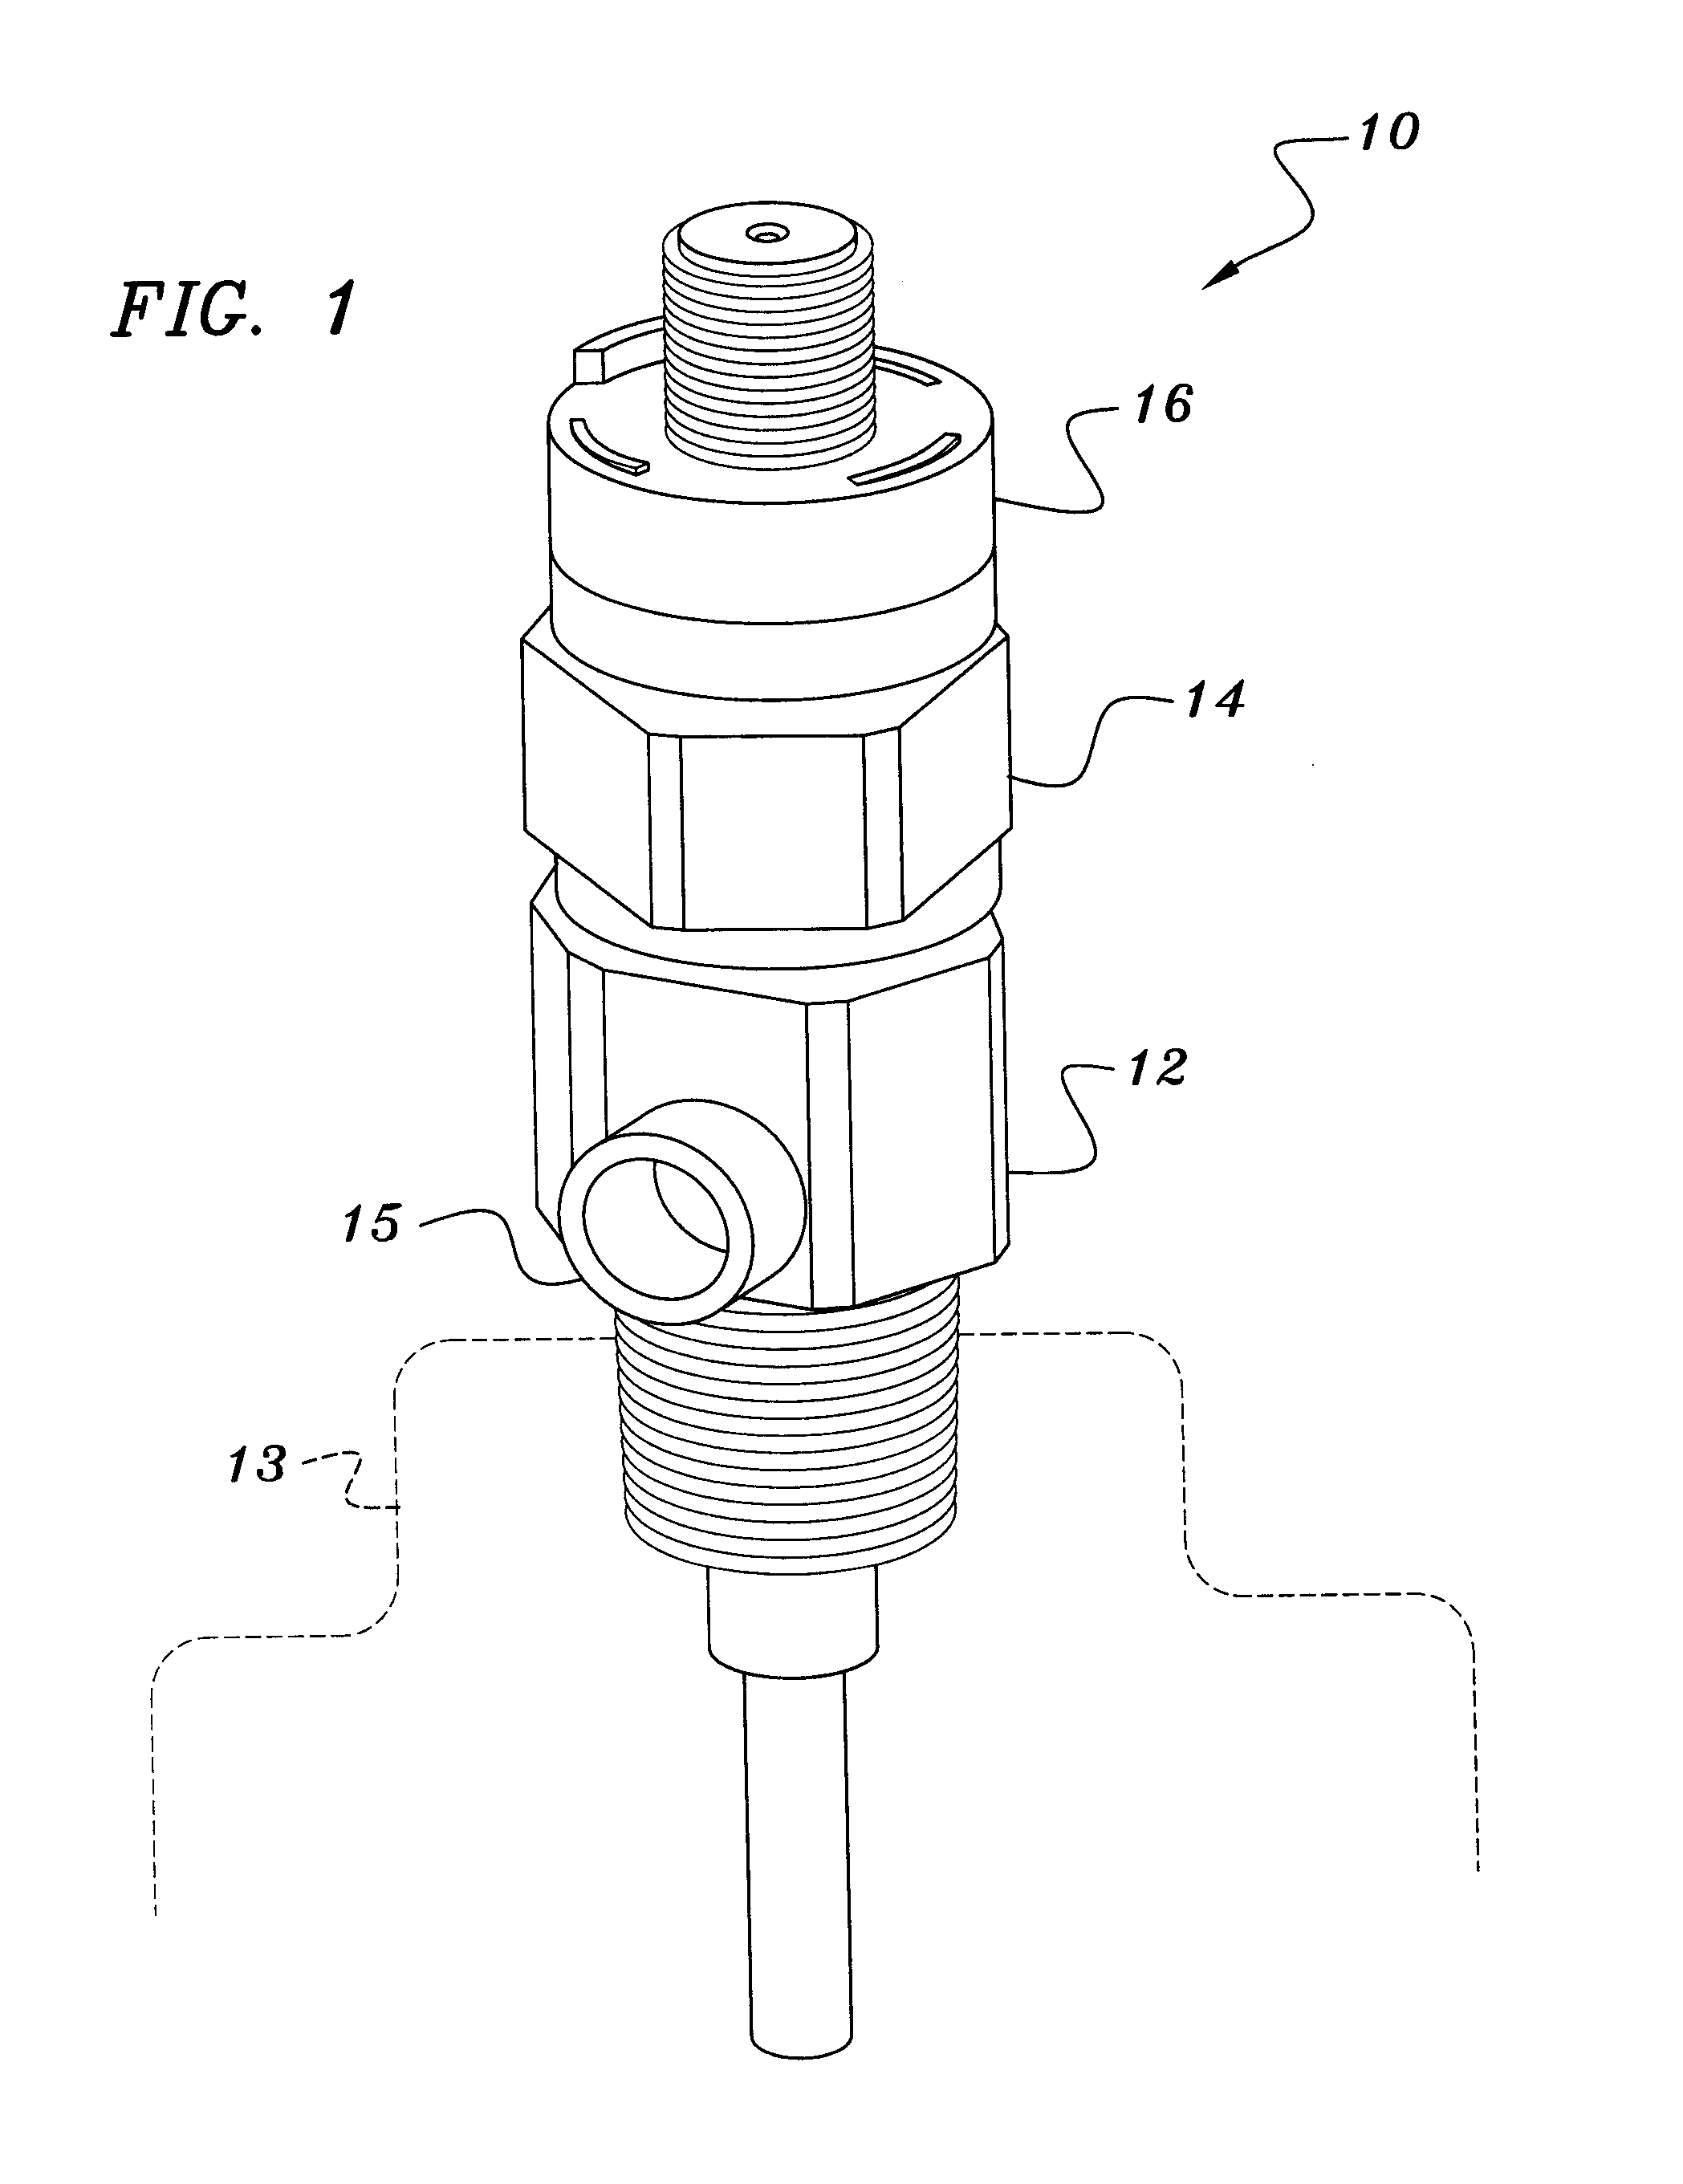 Inflation valve with pneumatic assist